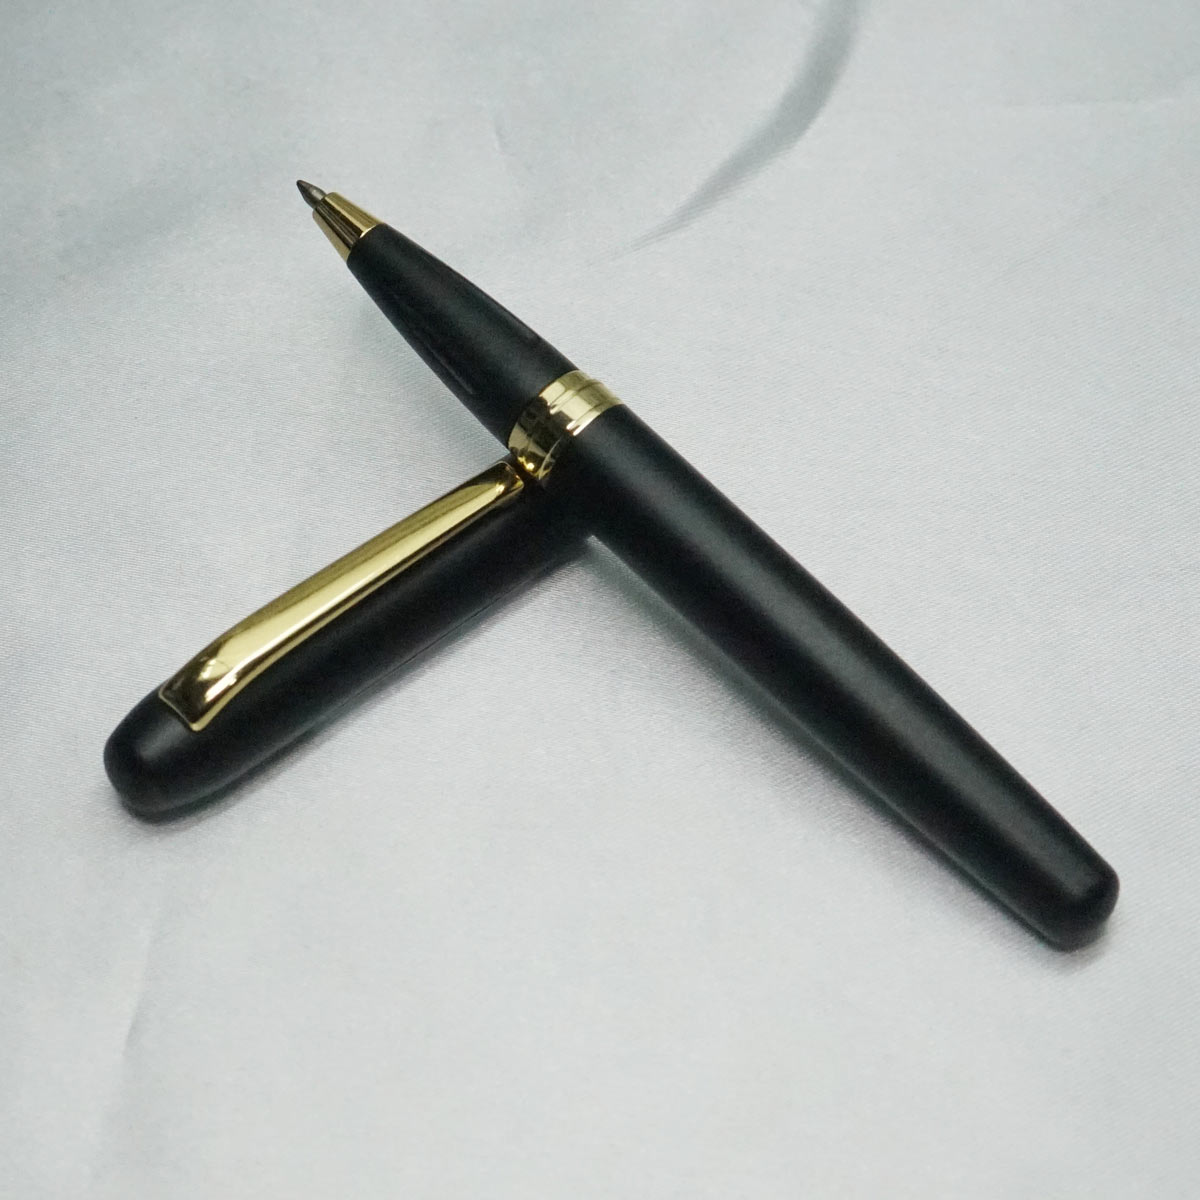 penhouse.in Matte Black Body and Magnetic Cap with Gold Ring in the cap Roller Ball Pen SKU 21836